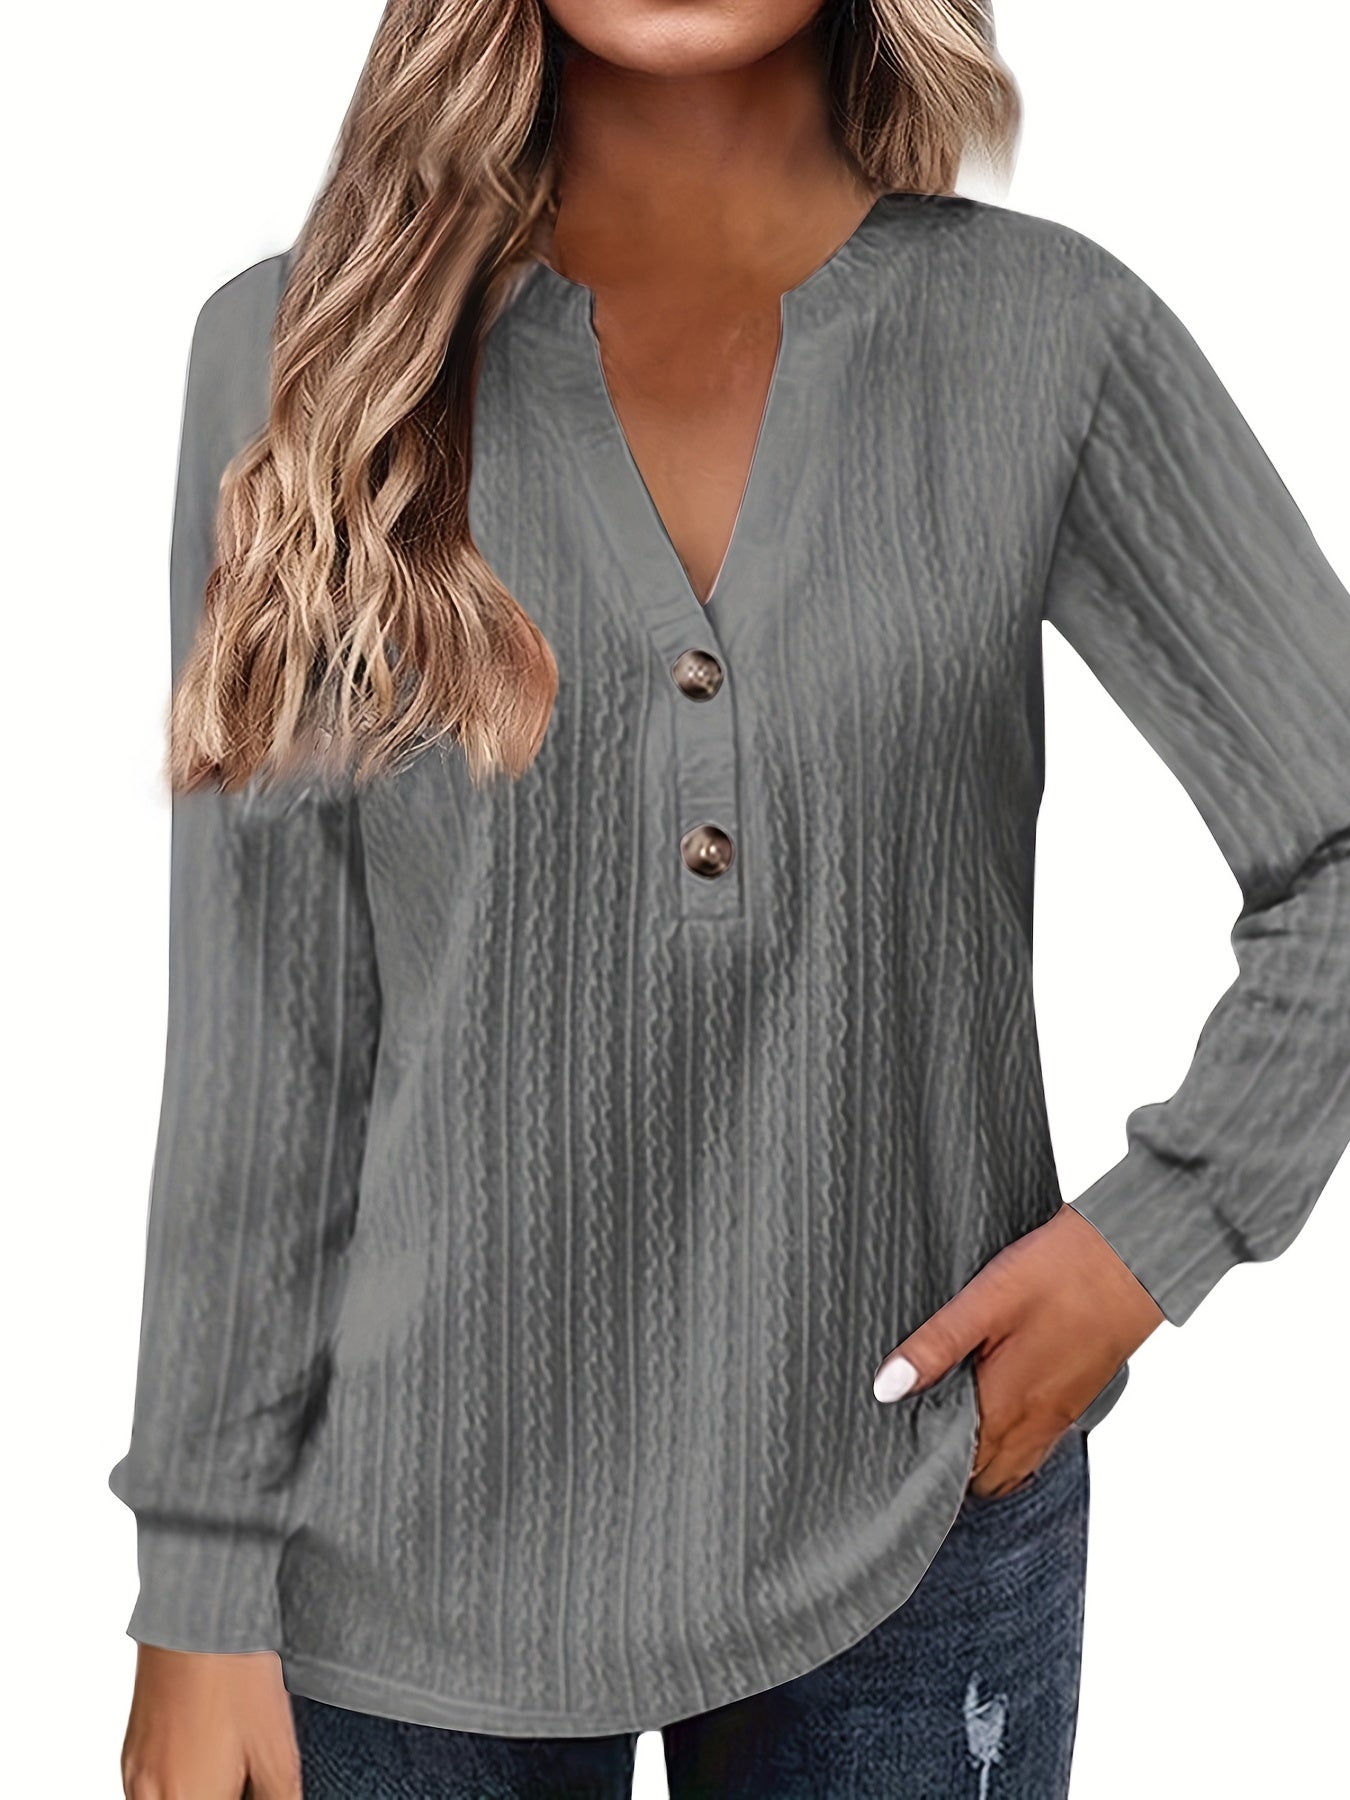 Plus Size Casual Top, Women's Plus Solid Cable Long Sleeve Button Decor V Neck Slight Stretch Top